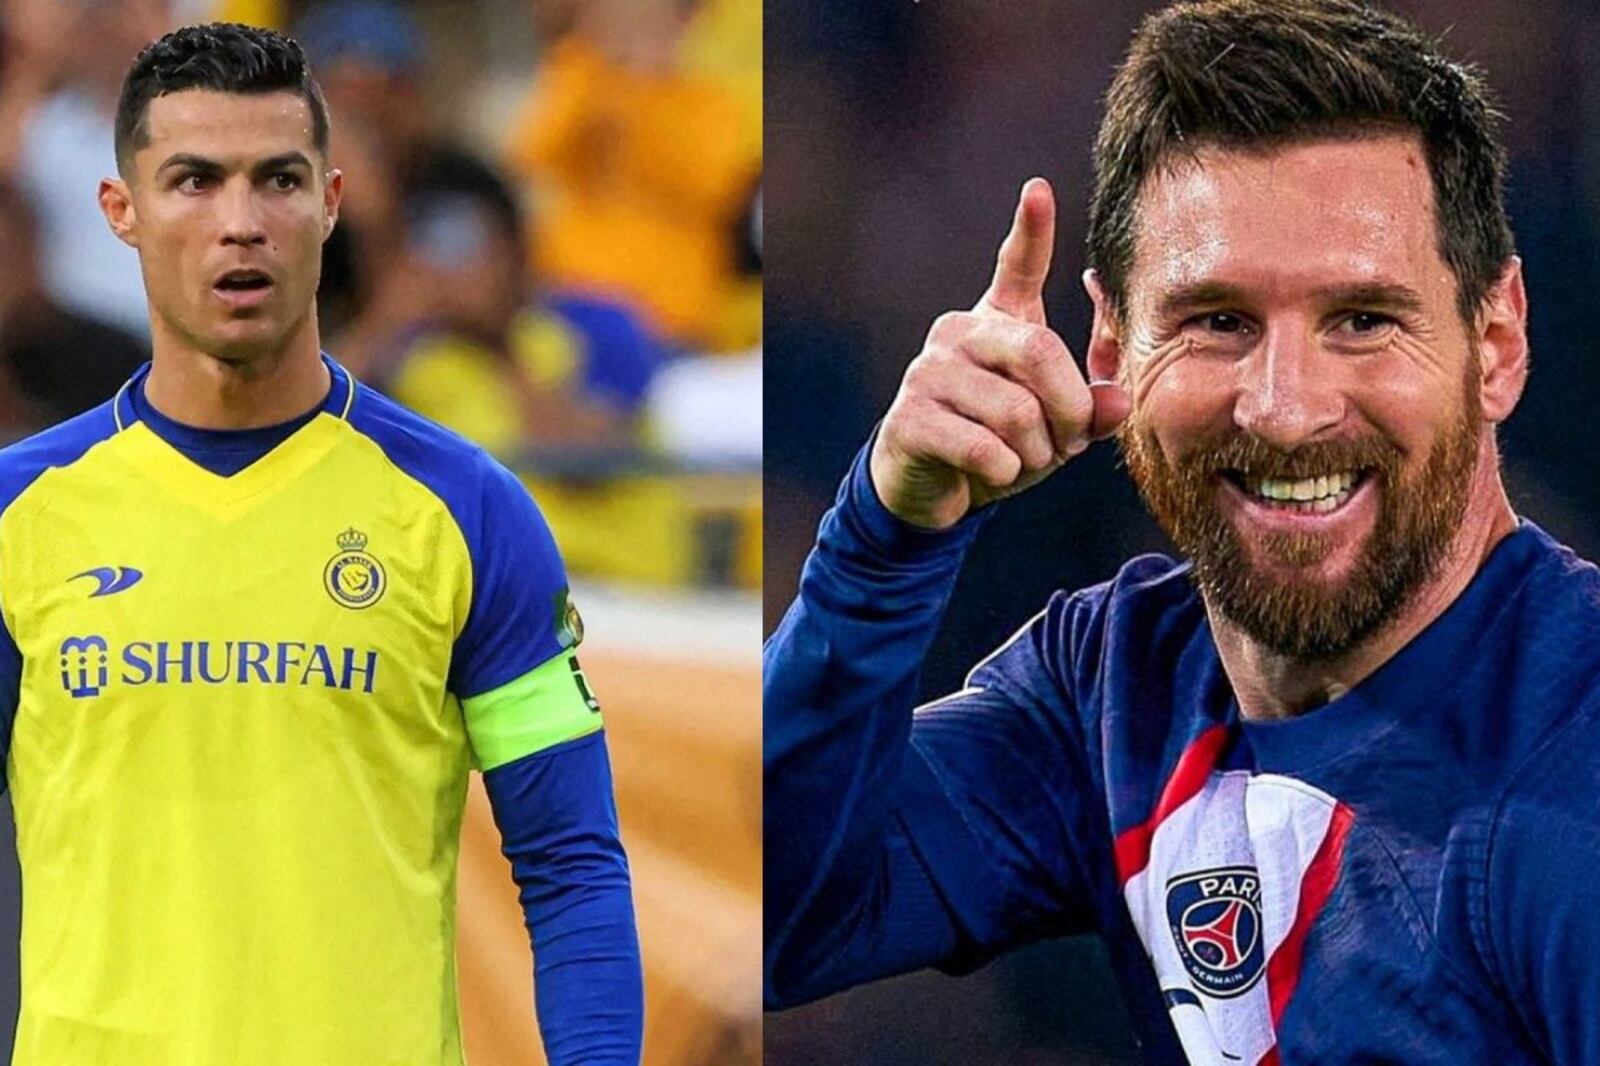 After leaving PSG, the lesson of greatness from Messi to Ronaldo that goes viral throughout the world